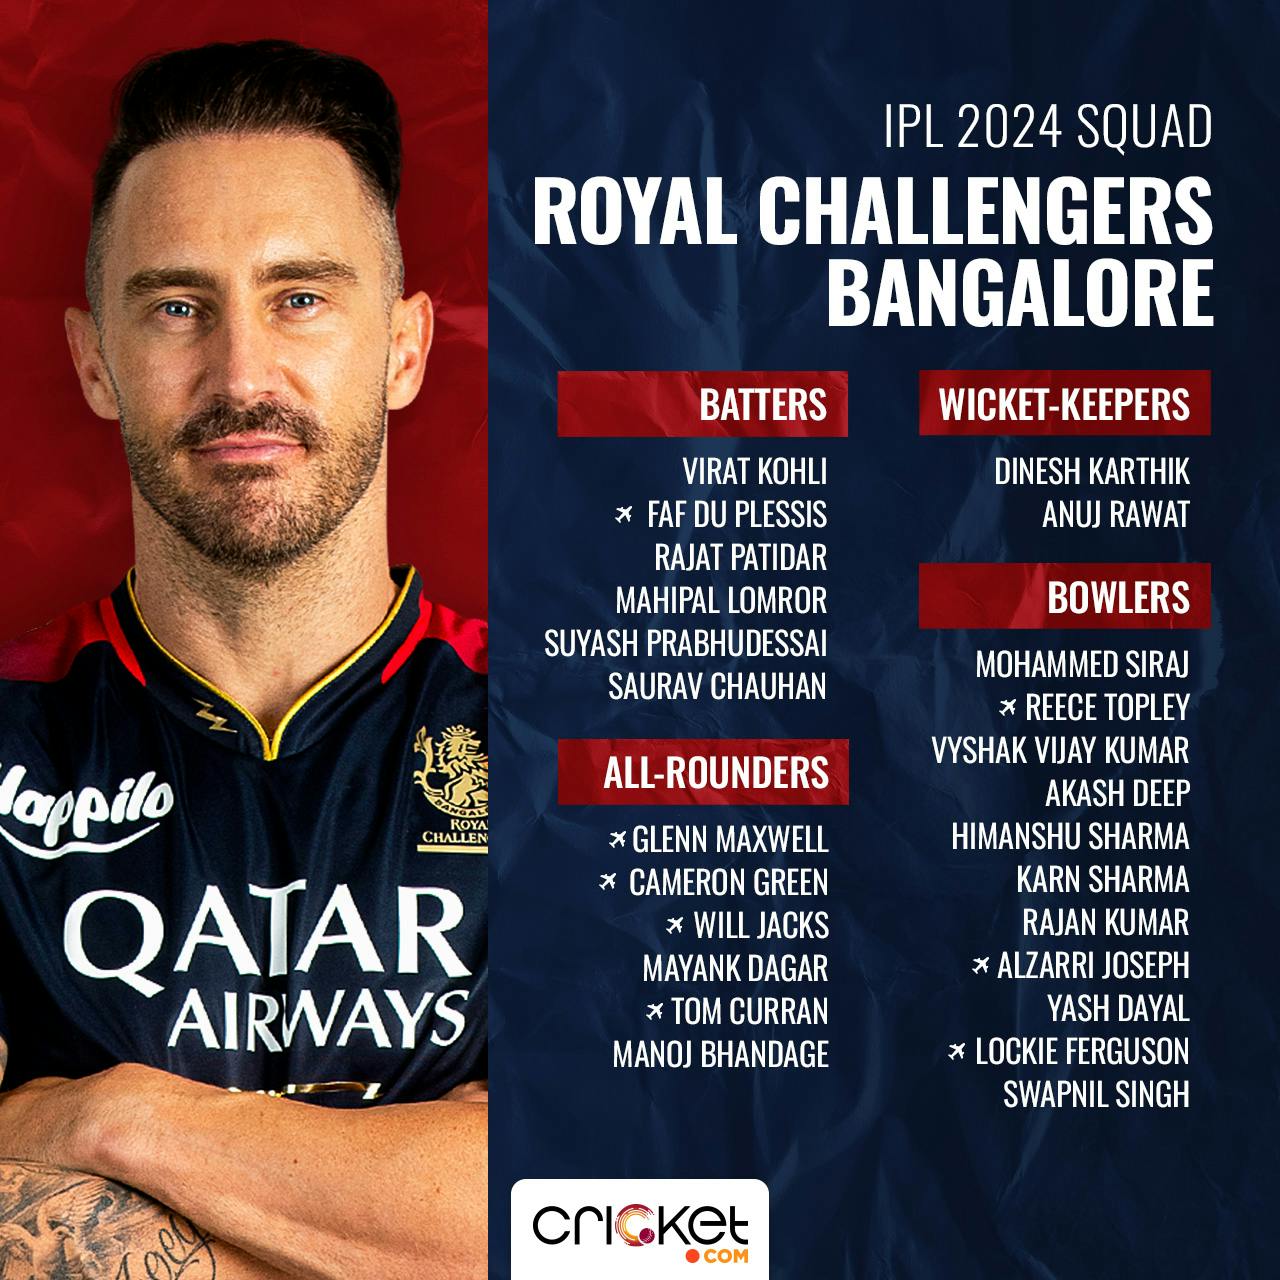 RCB have never invested enough money in making a proper team with